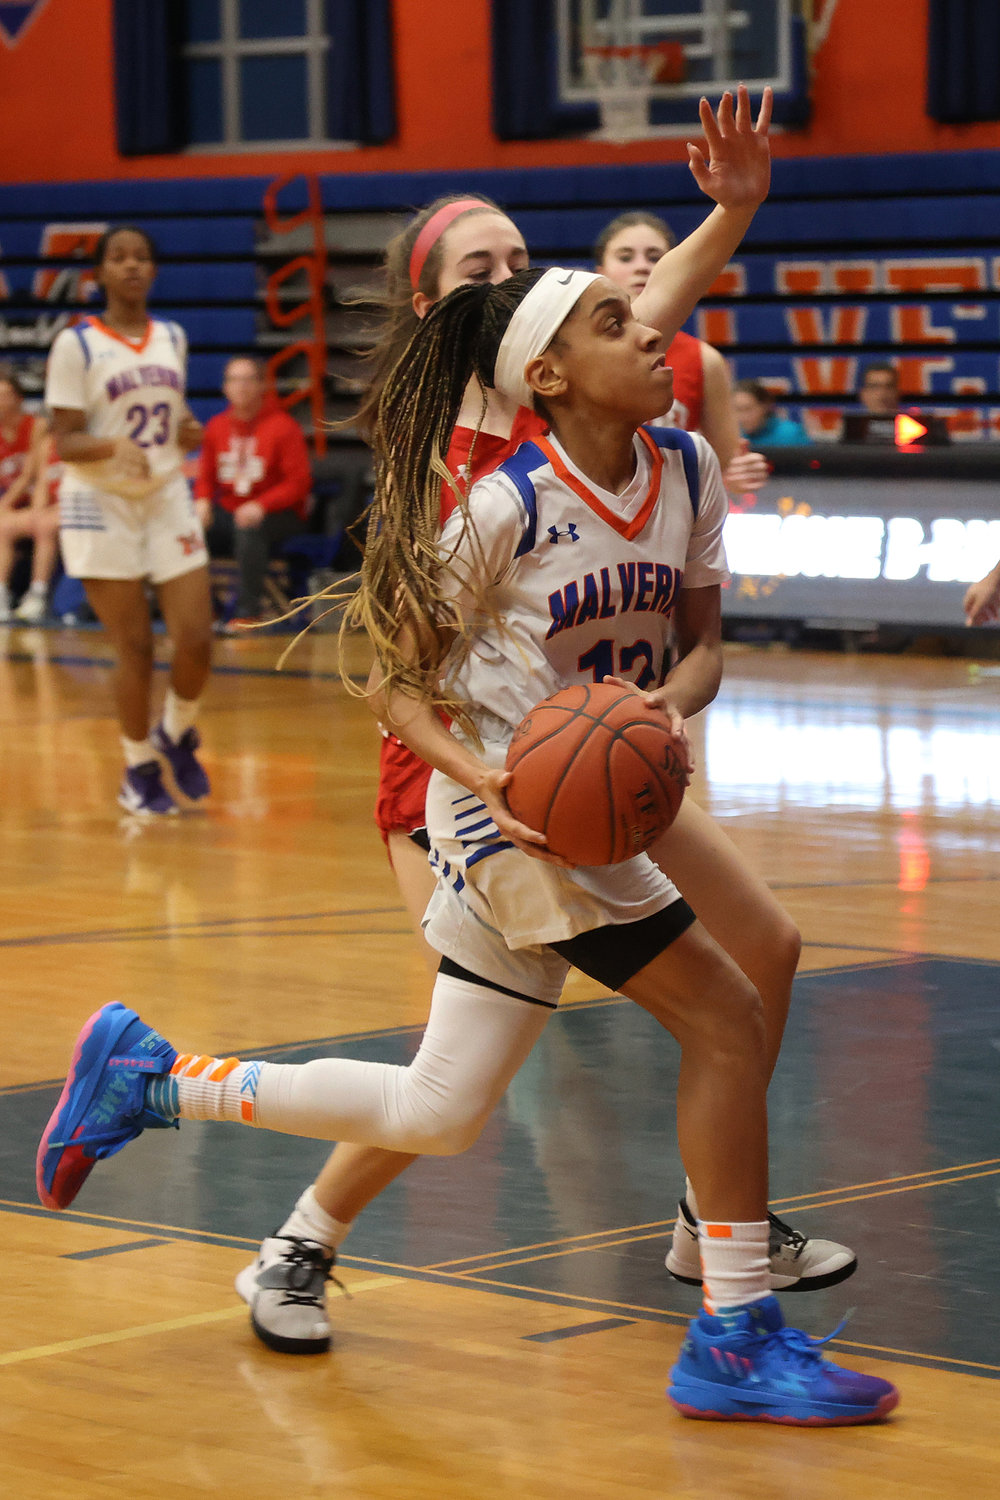 Junior Mikayla Johnson has been a catalyst for Malverne including a 20-point performance in last Friday’s win over East Rockaway.